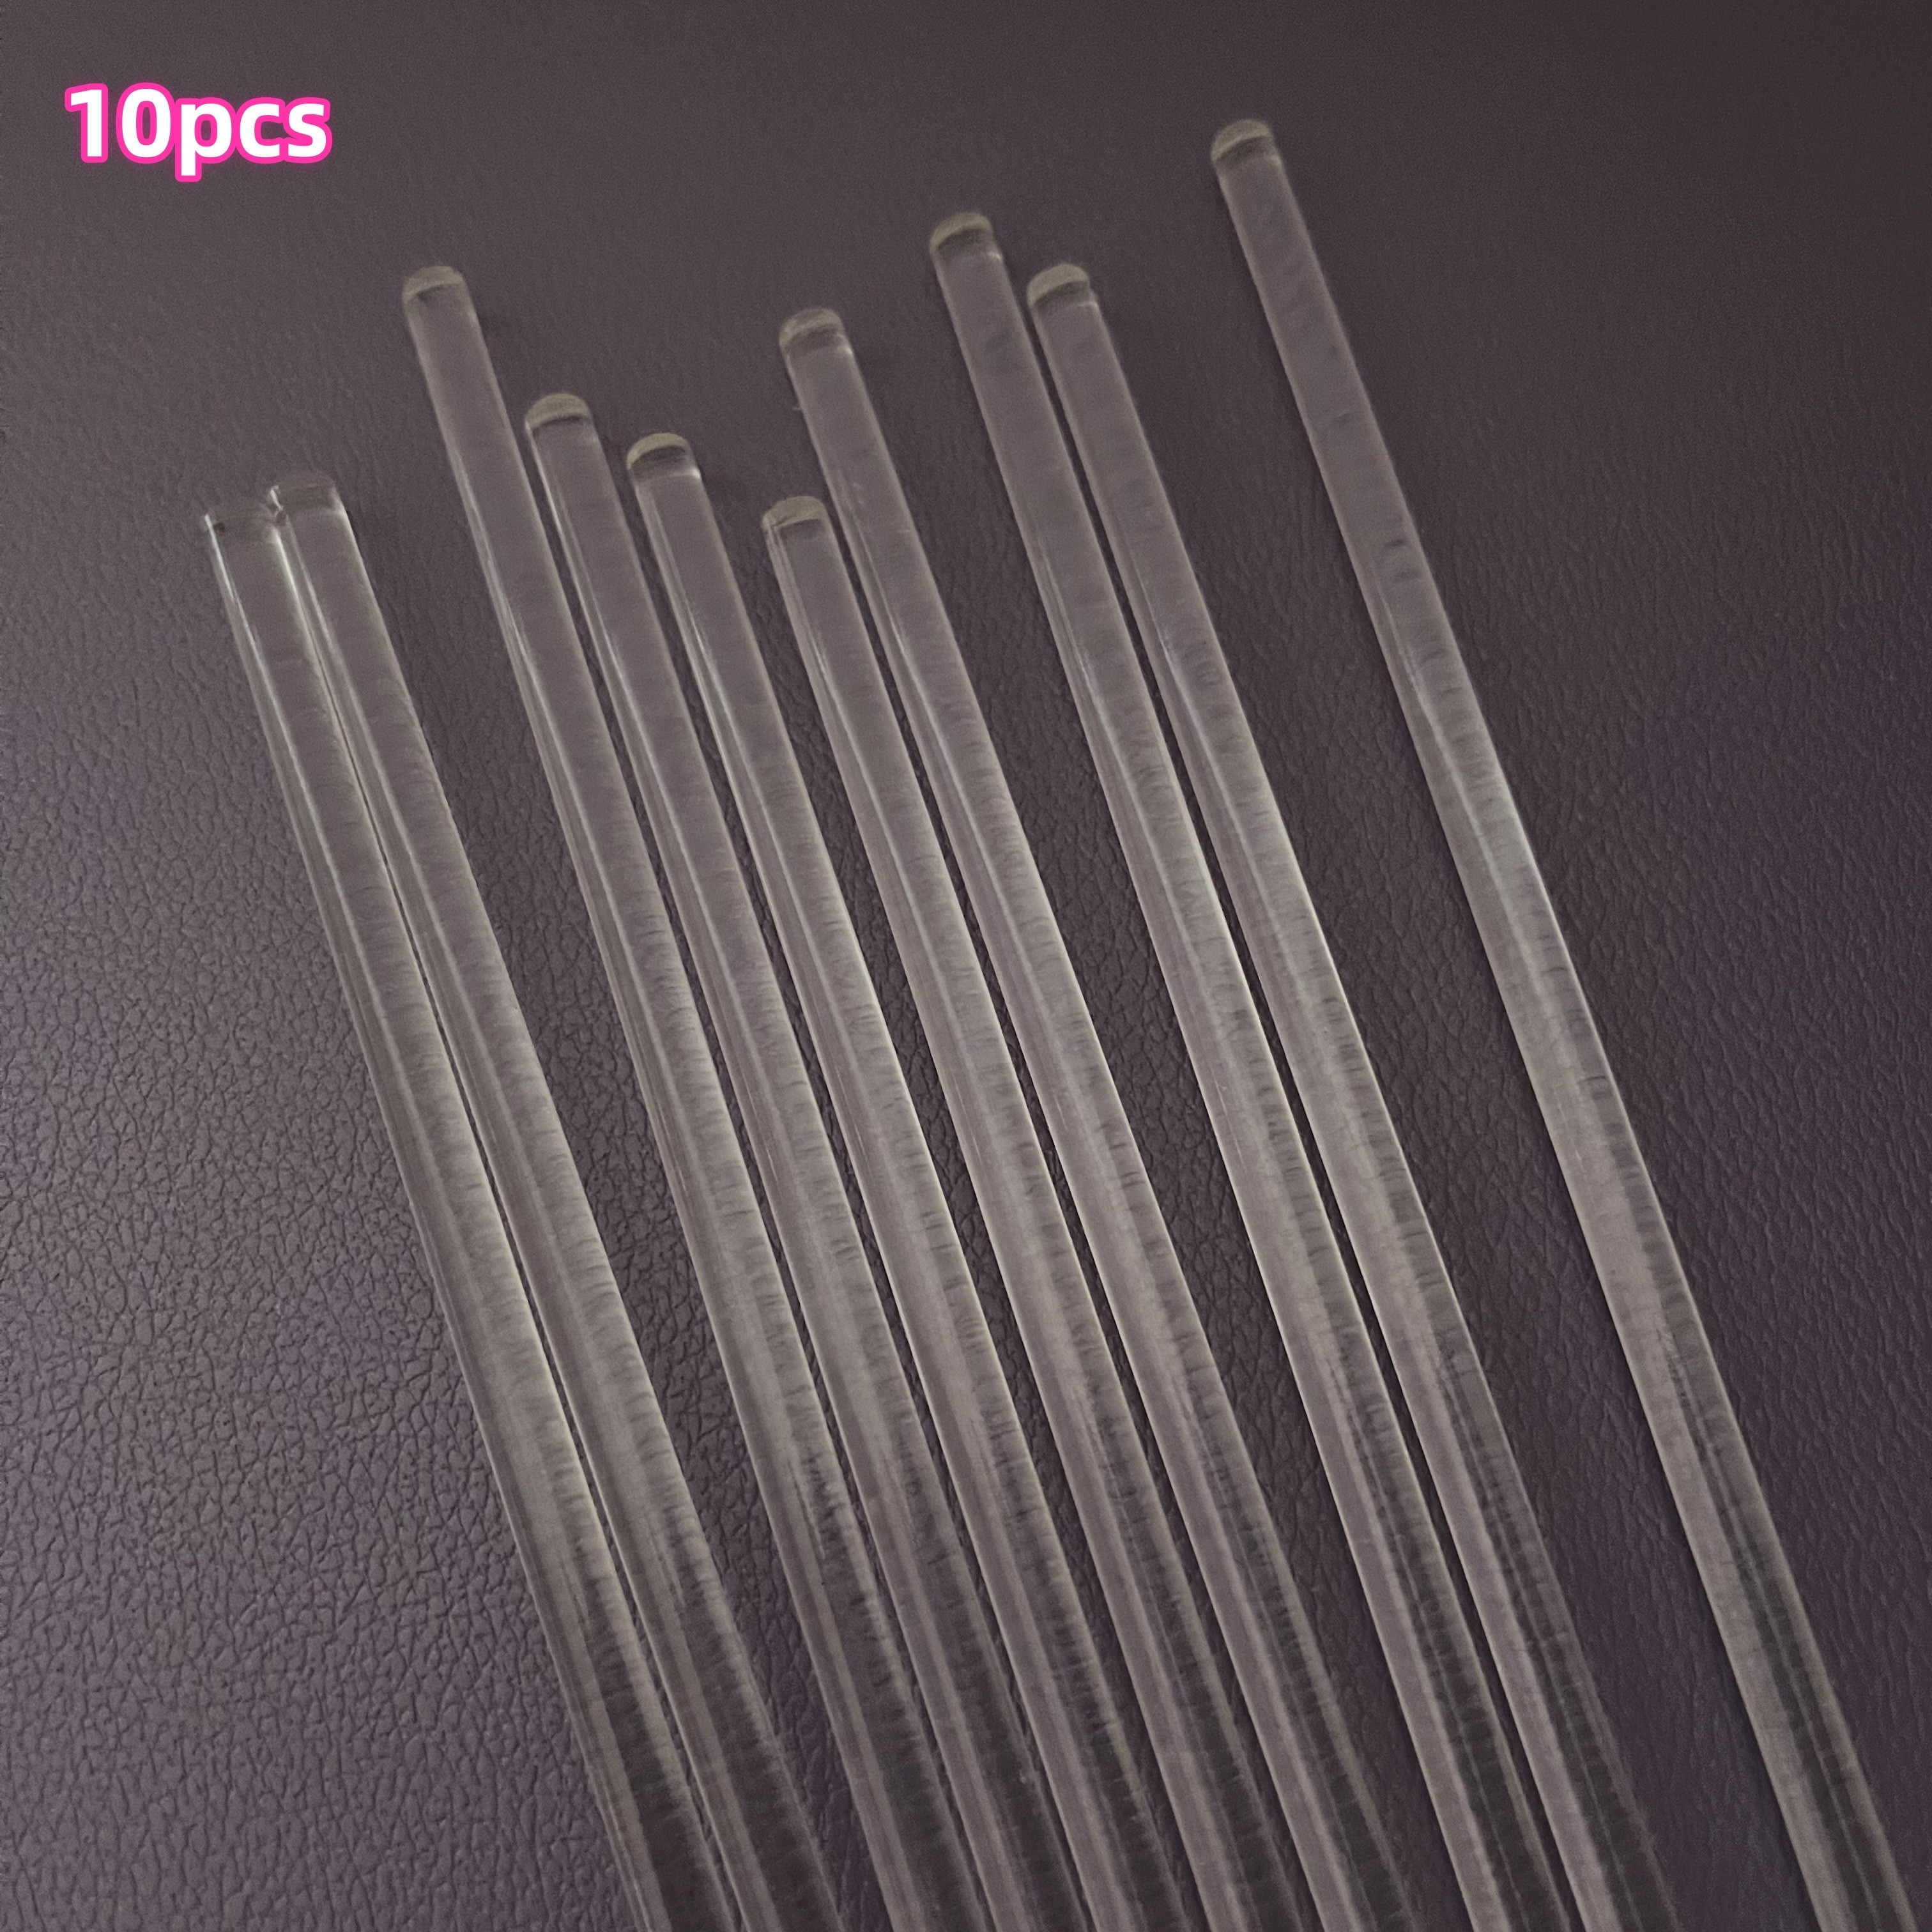 

10pcs Glass Stirring Rods, 7.87in/20cm, For Laboratory Science Experiments - Durable Glass Material